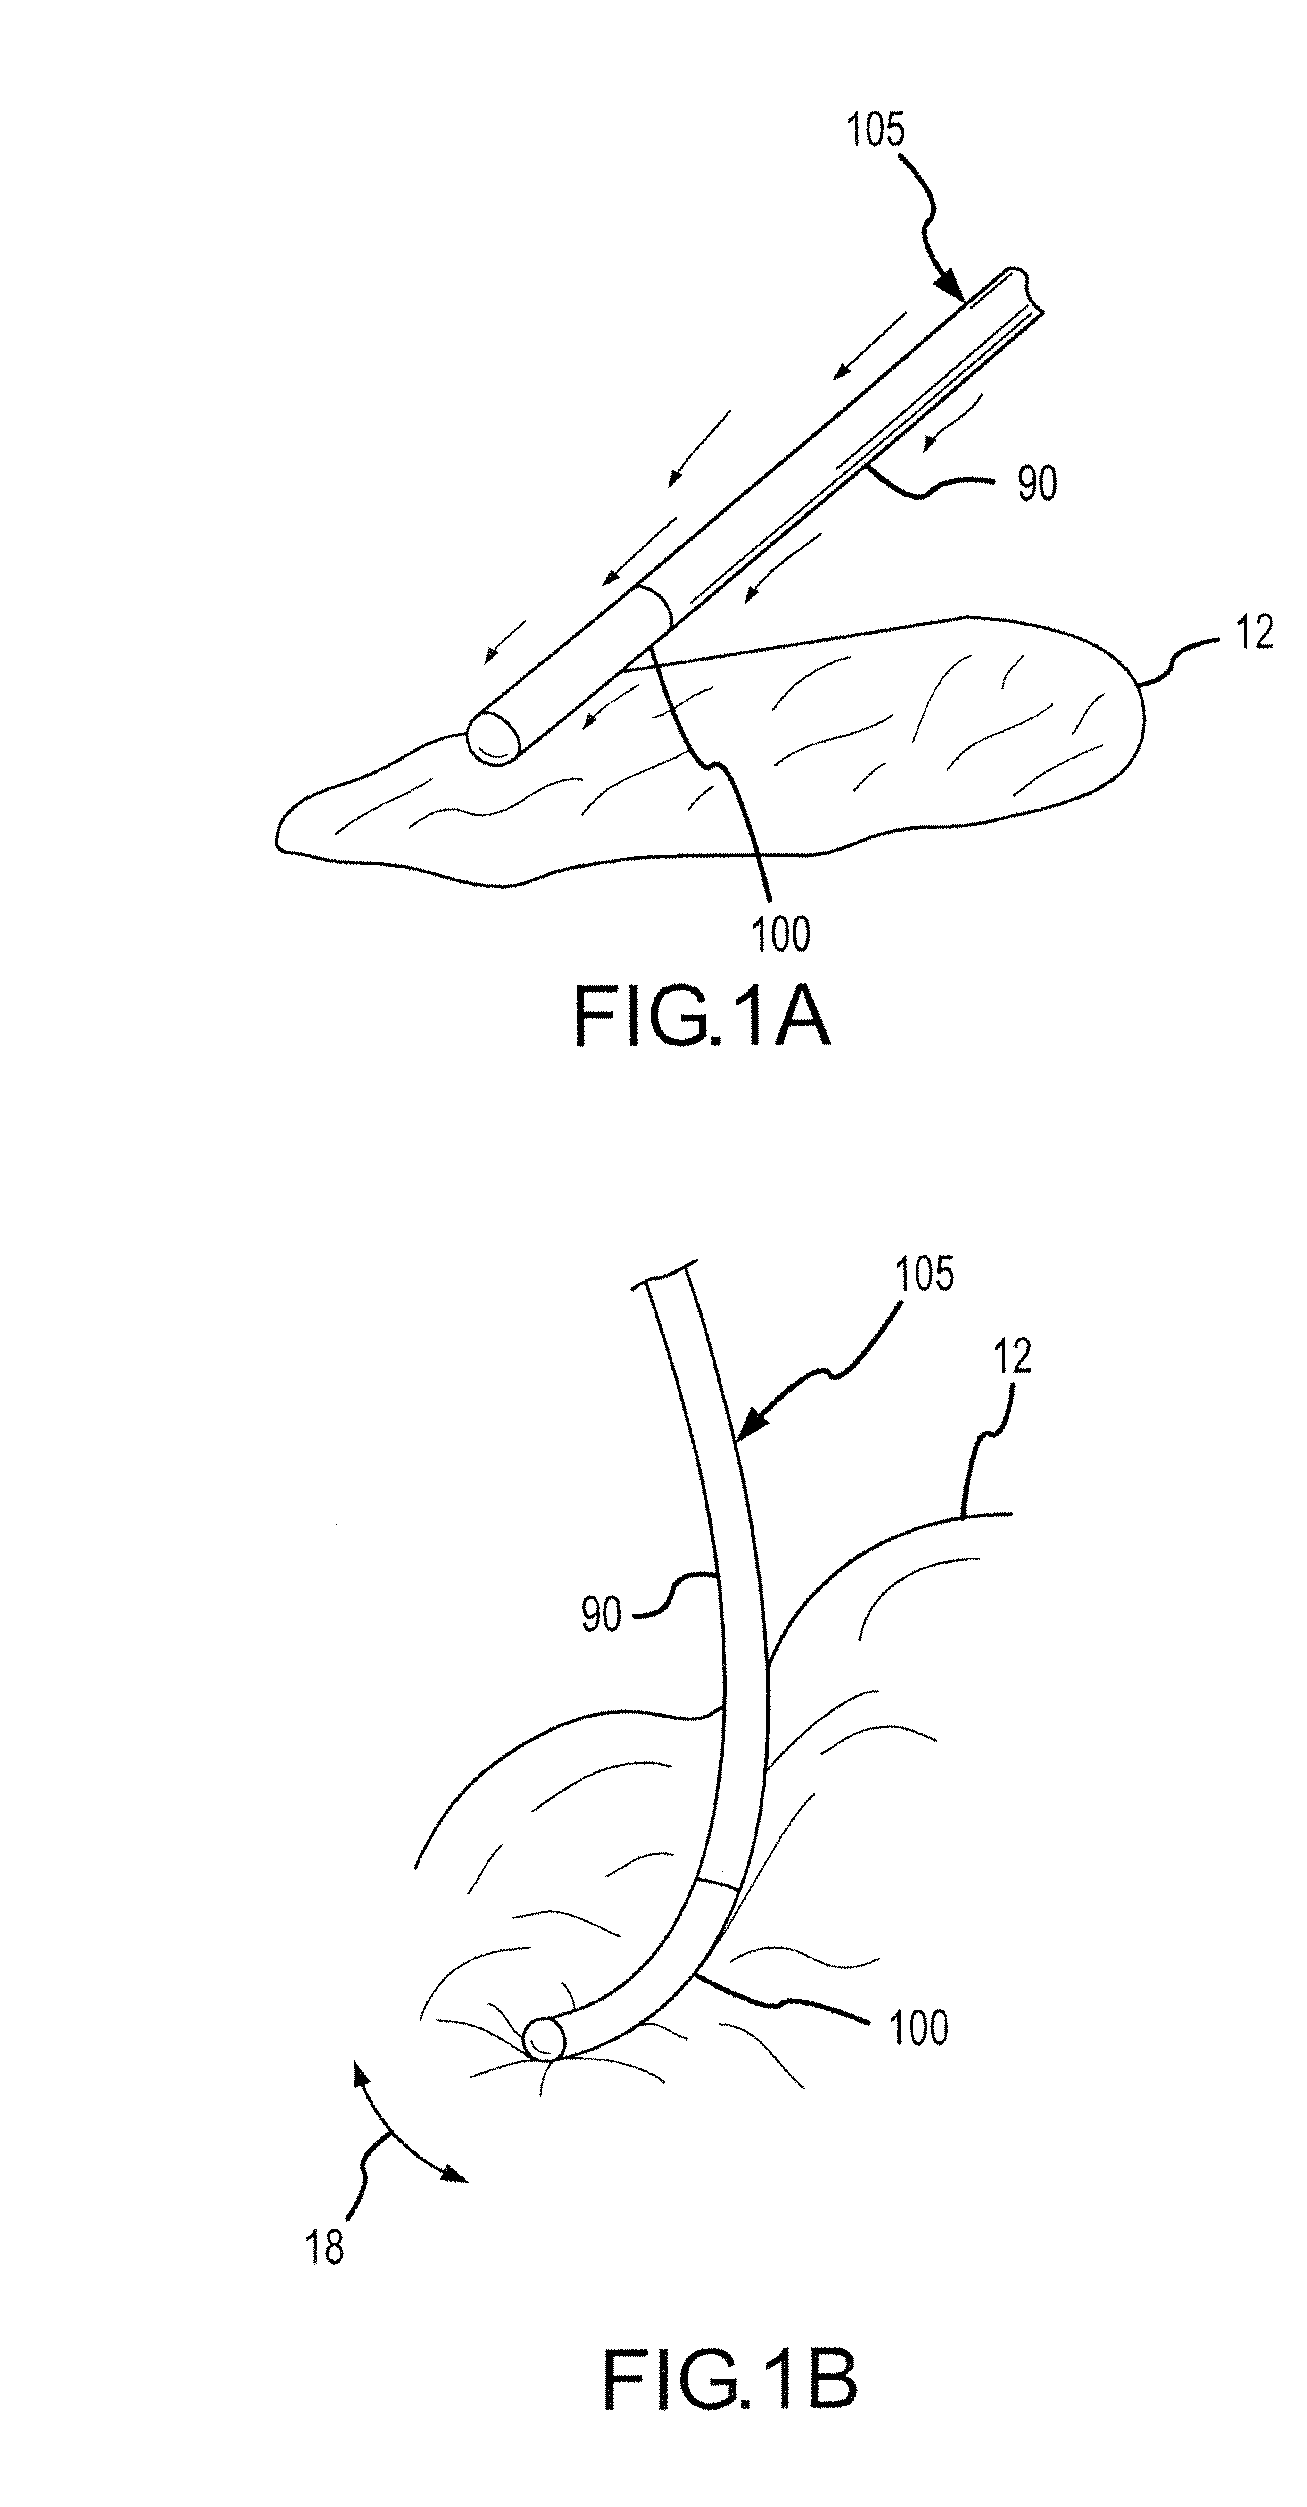 Adjustable length flexible polymer electrode catheter and method for ablation